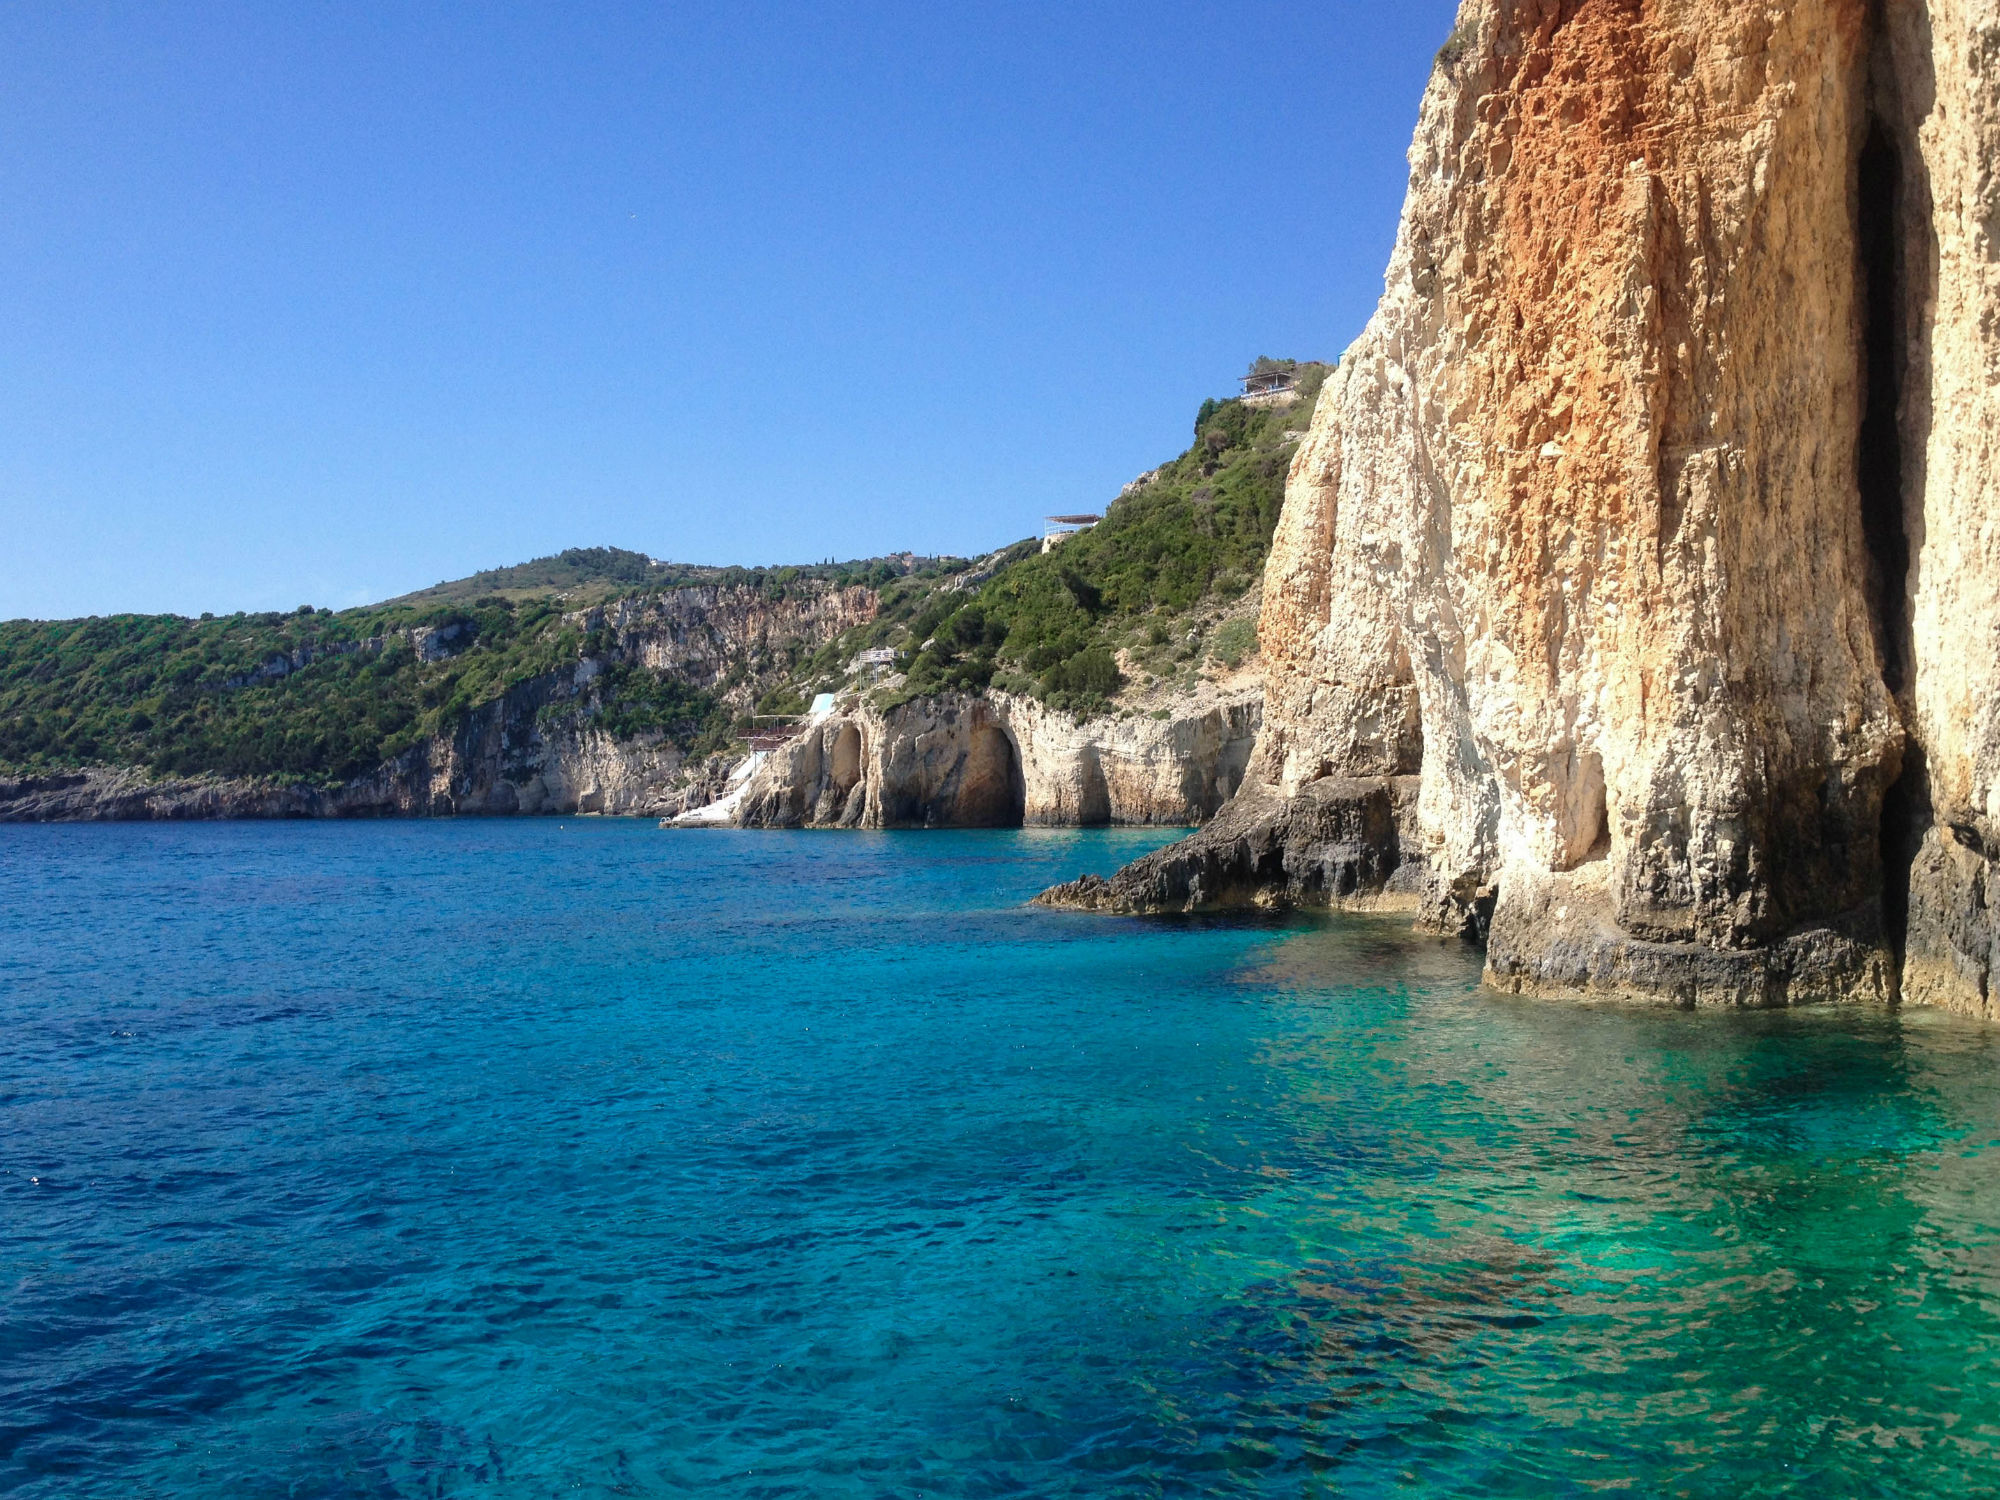 The Cliffs And Water Of The Island Of Zakynthos